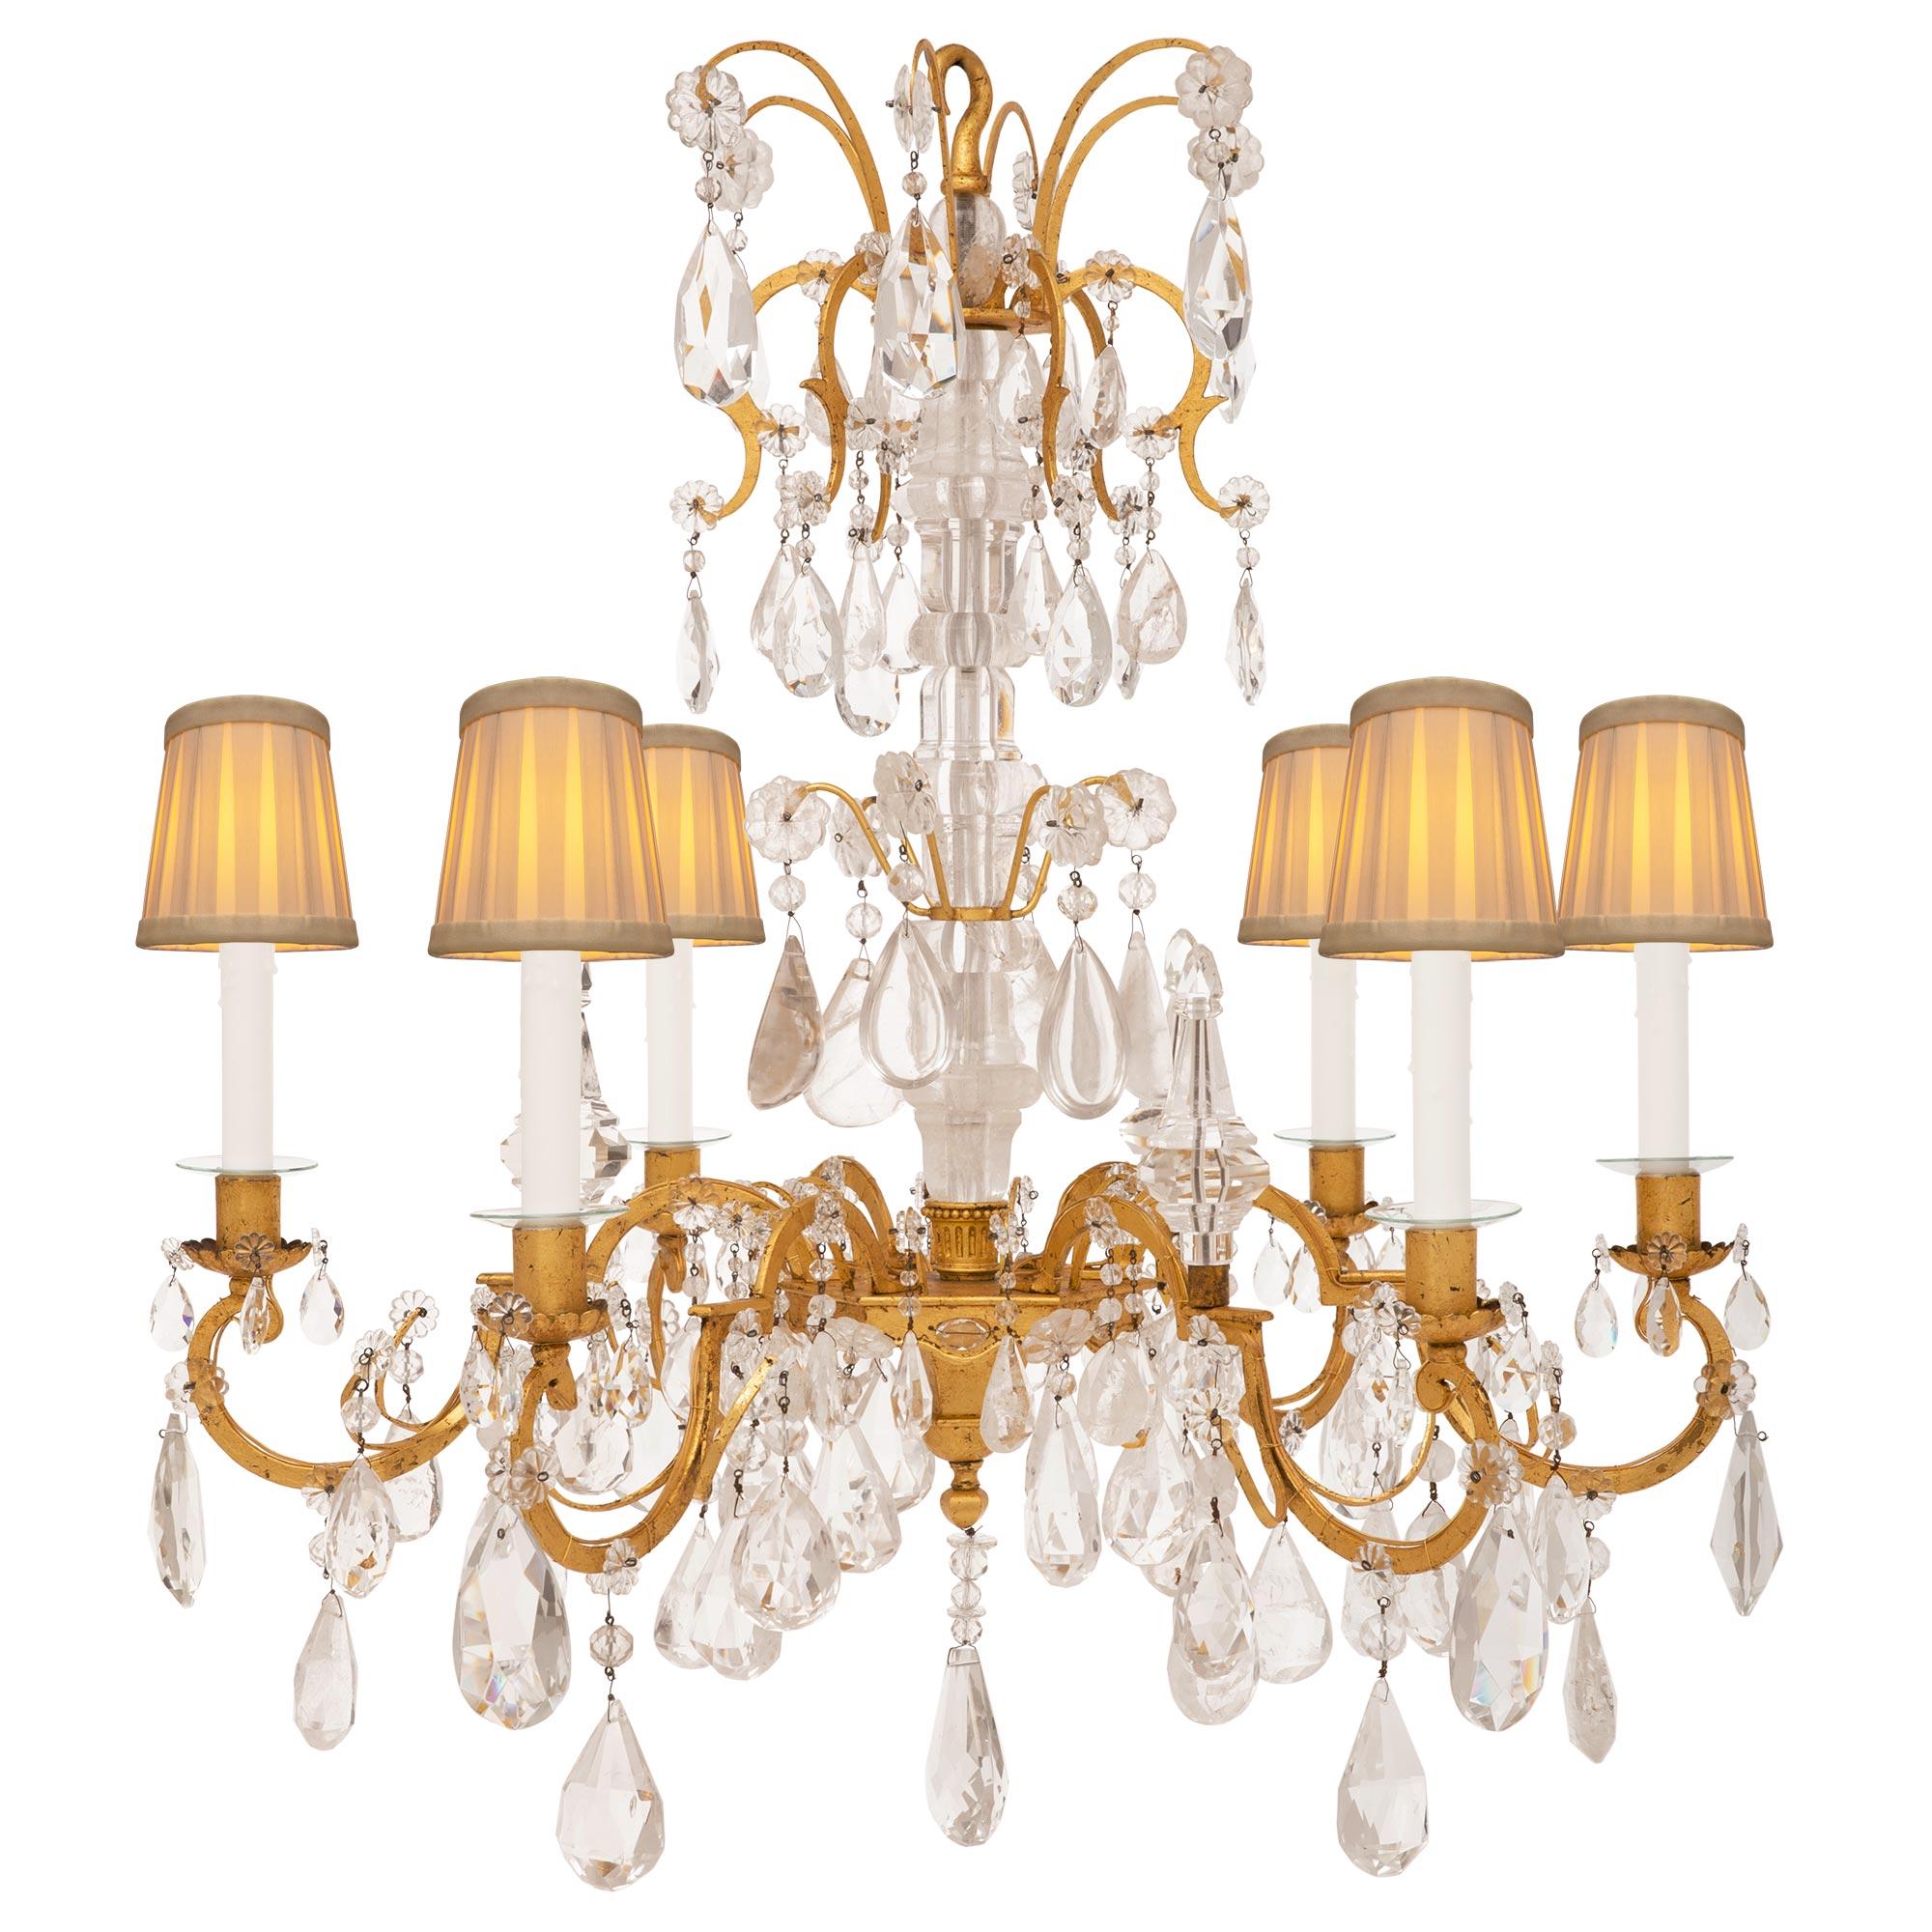 French 19th Century Louis XV St. Gilt Metal and Rock Crystal Chandelier